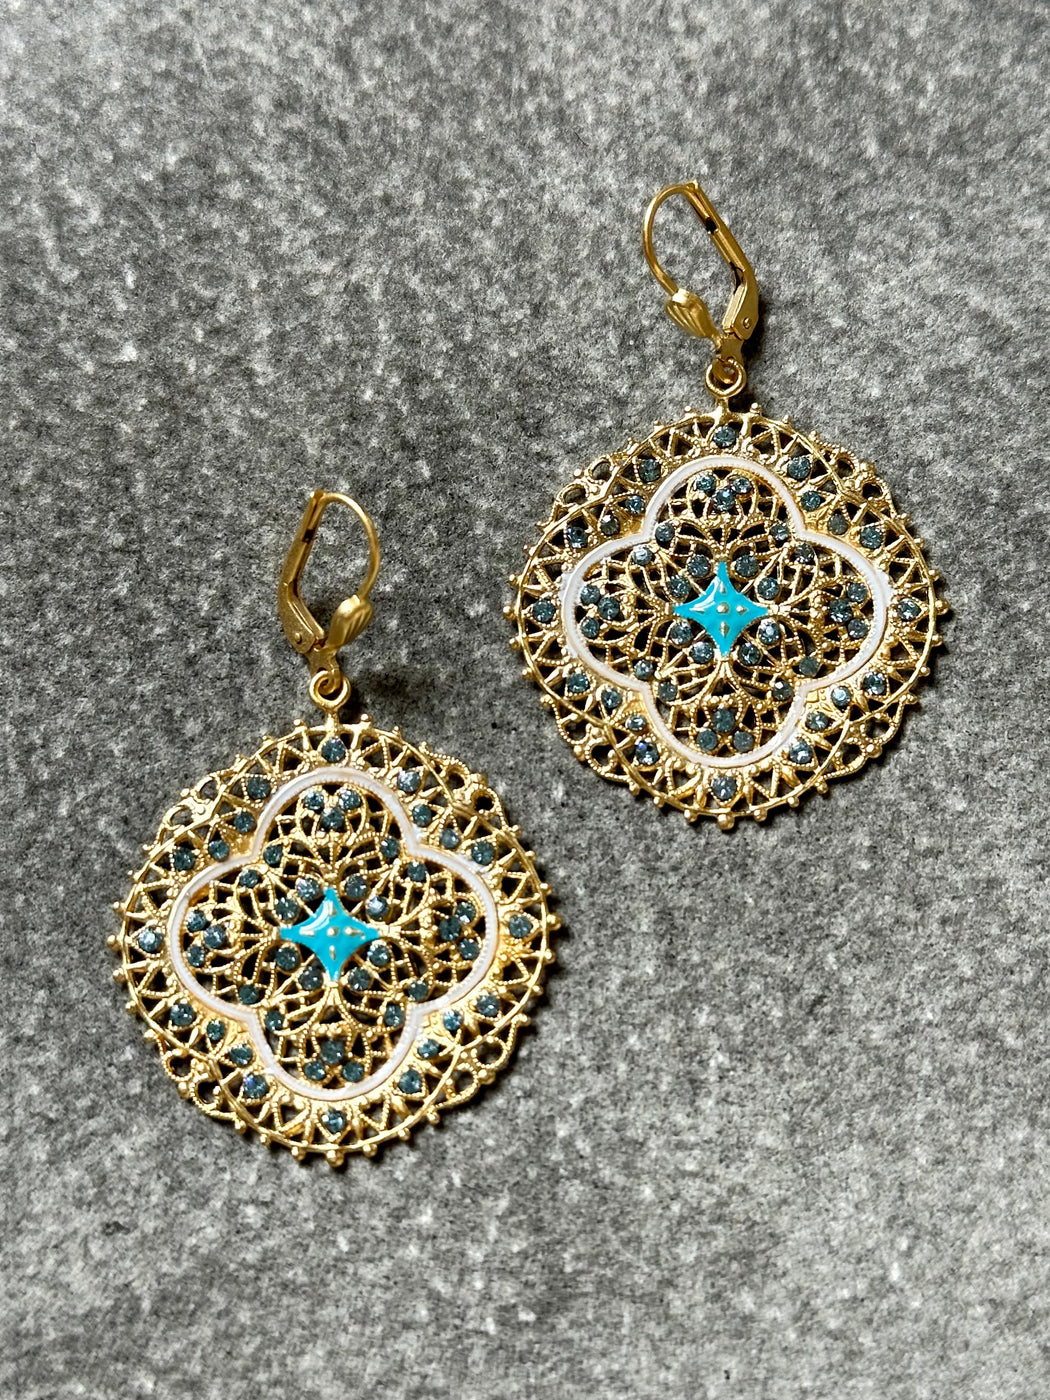 "Andalusia" Filigree Earrings by Catherine Popesco